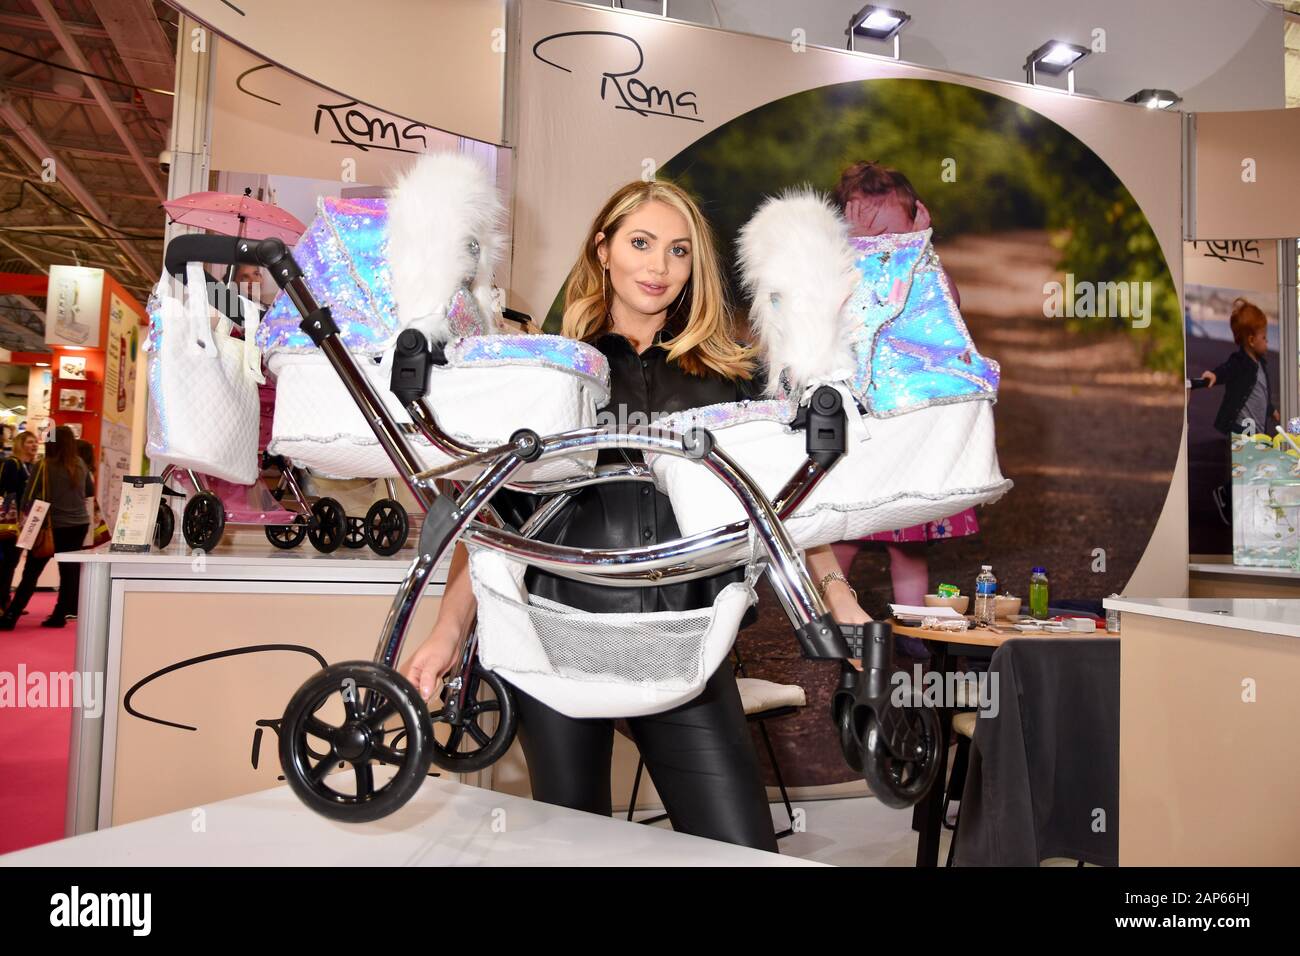 amy childs buggy